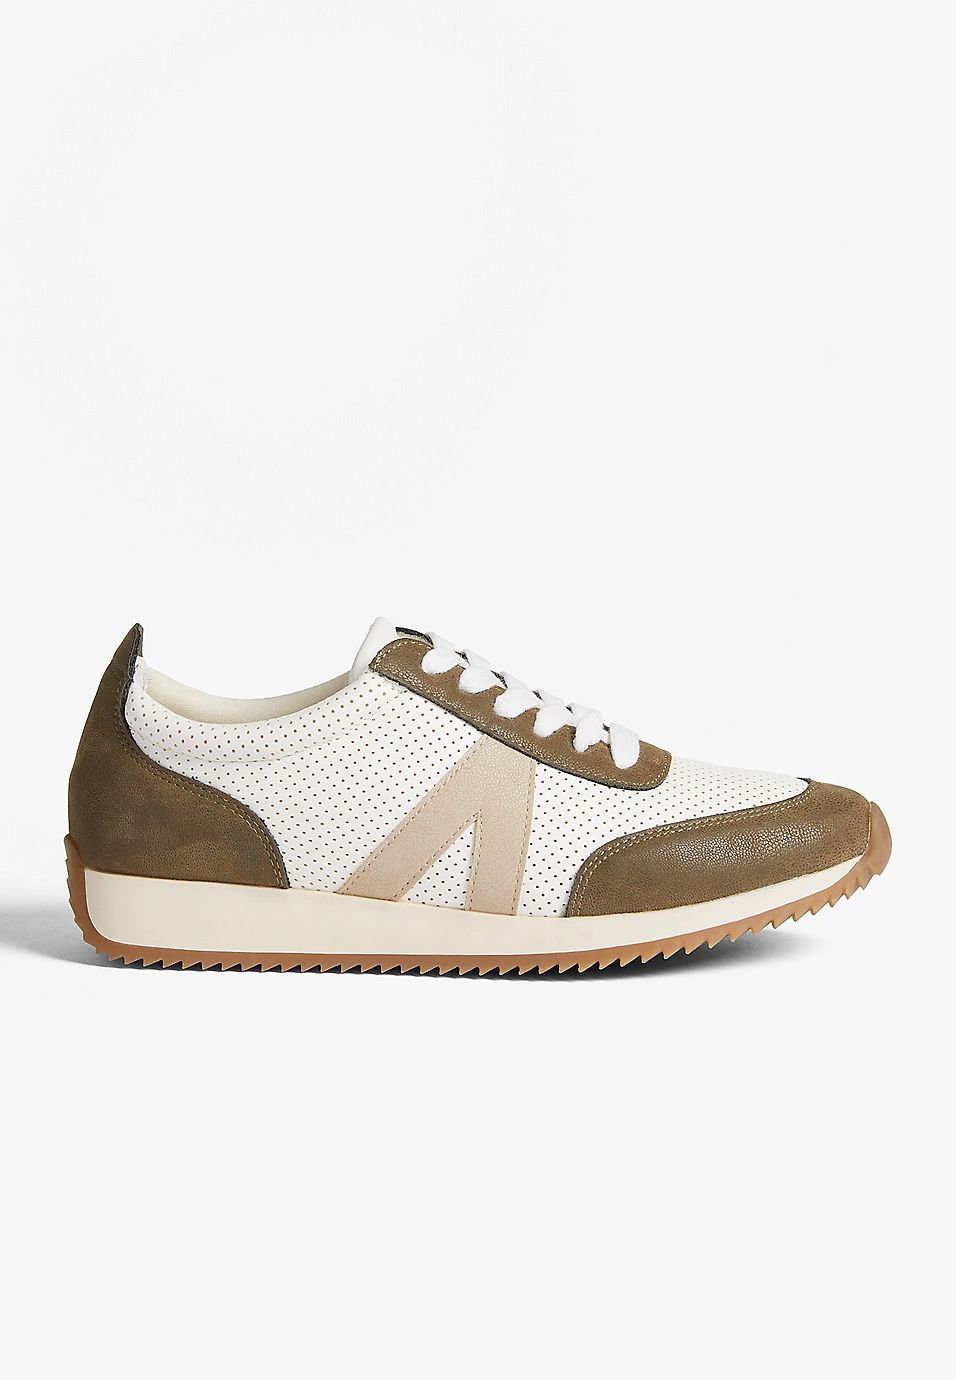 Farah Trainer Sneaker | Maurices